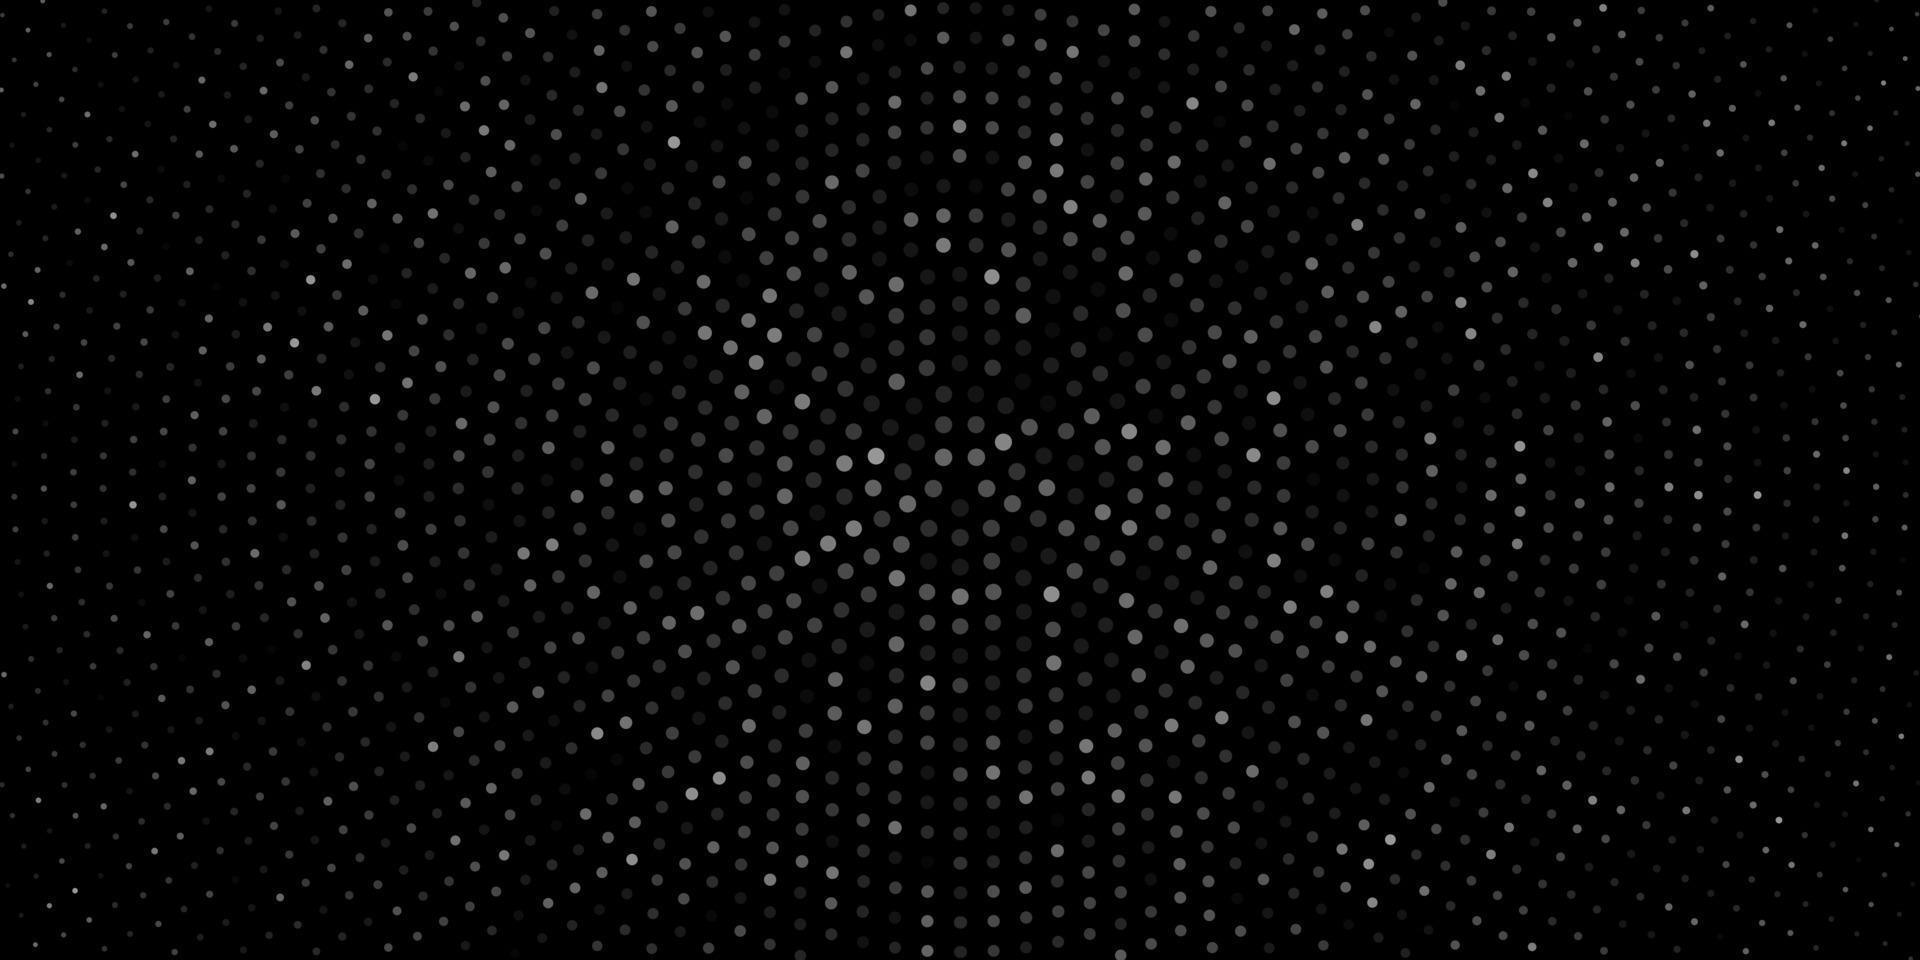 Black and white Halftone background dotted background vector